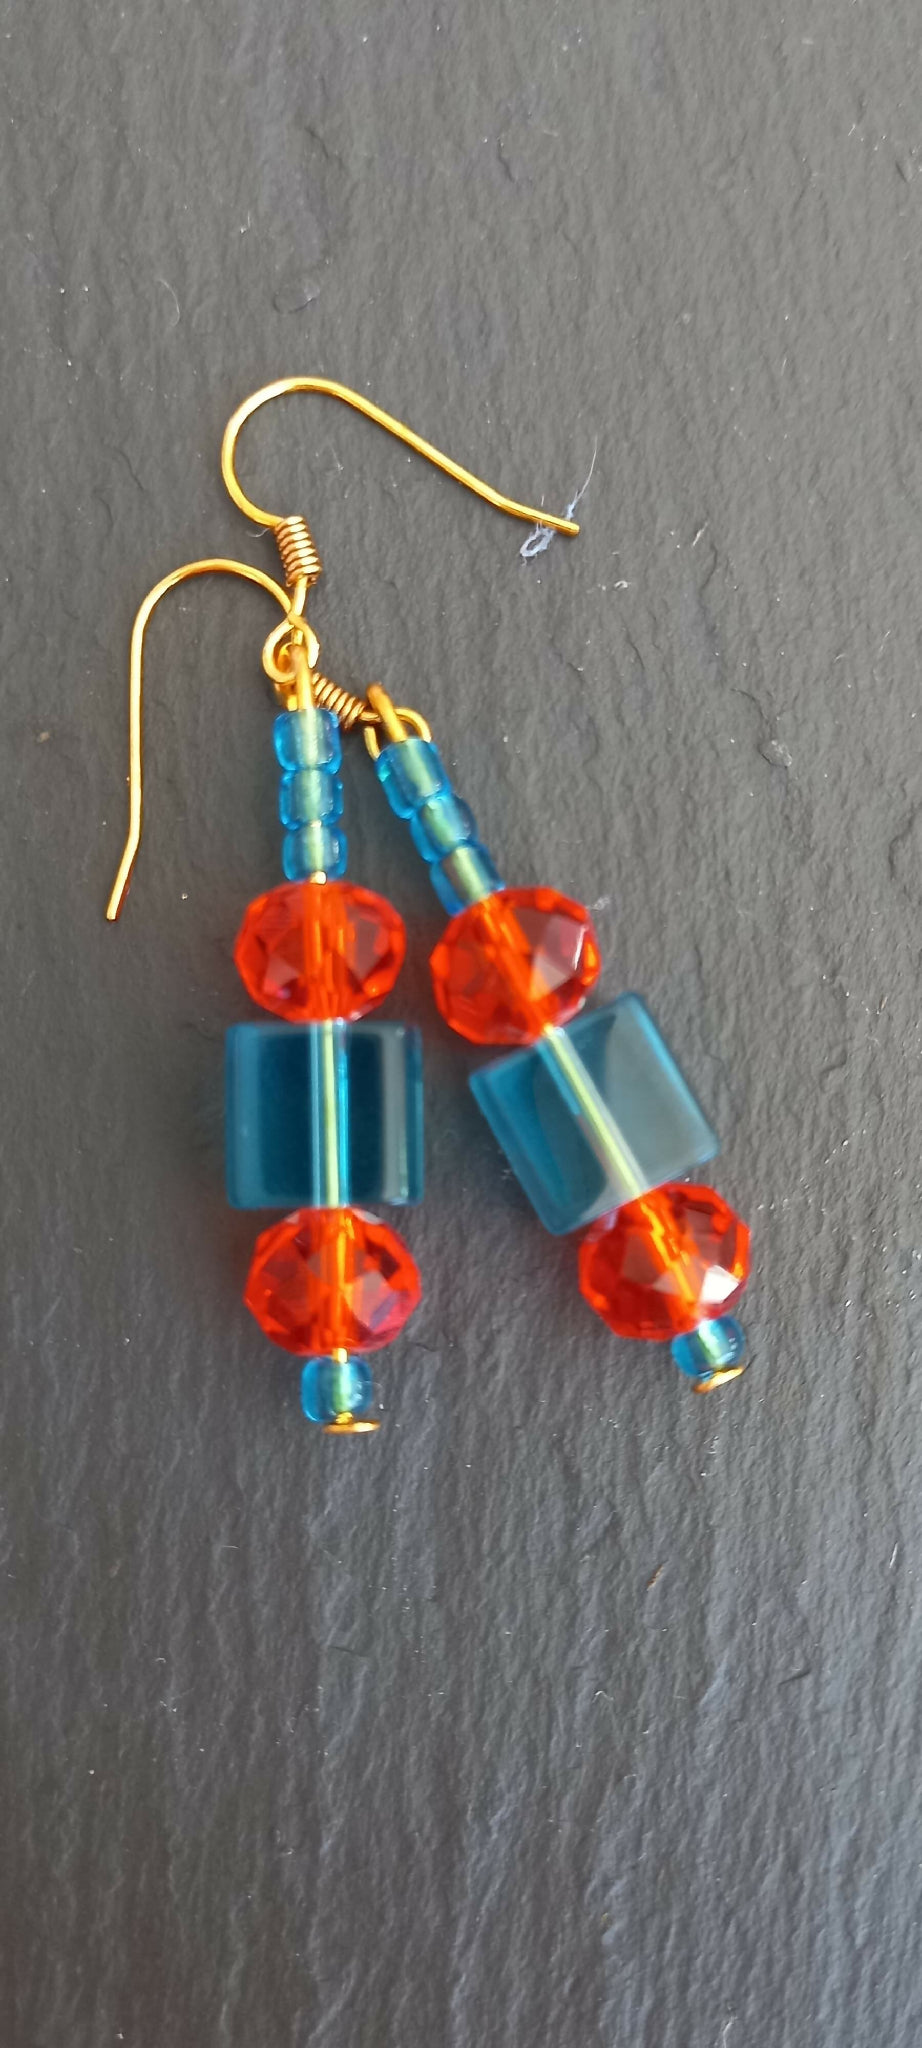 Earrings - Blue Cube and Orange Crystal Beads